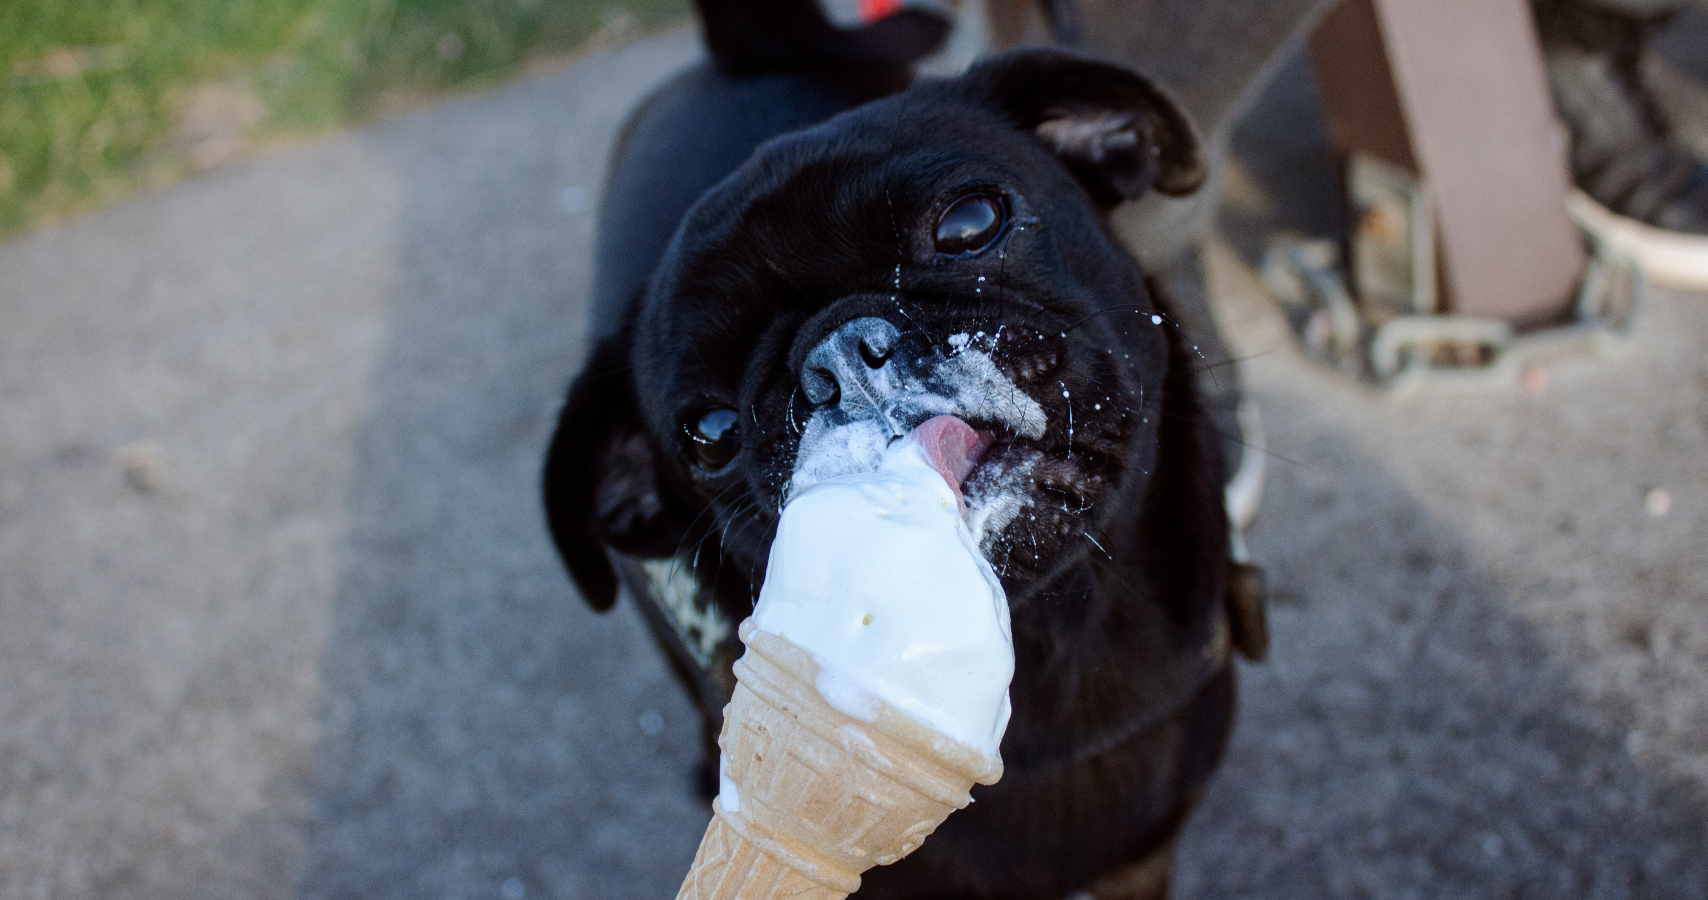 A pug eating ice cream out of a cone